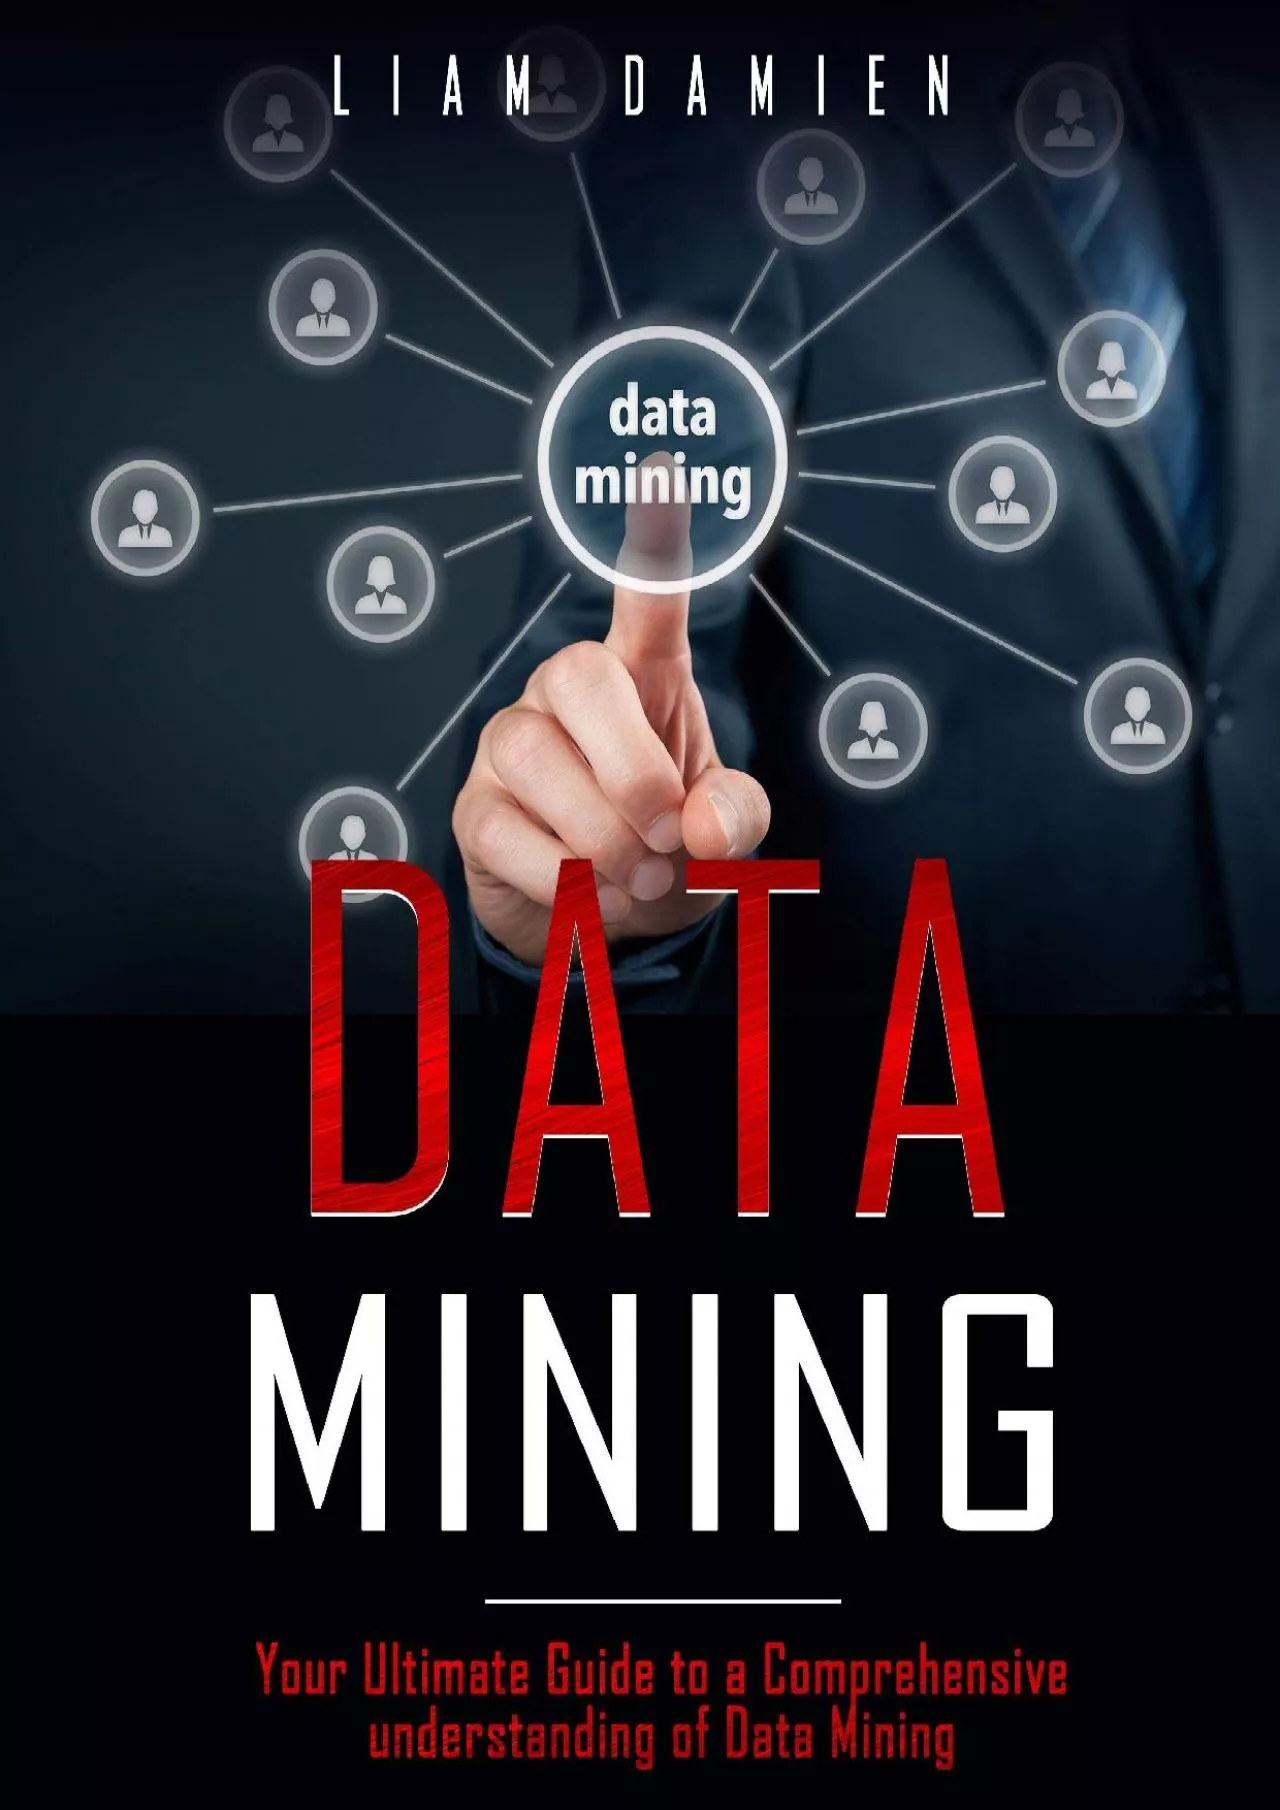 [READING BOOK]-Data Mining: Your Ultimate Guide to a Comprehensive Understanding of Data